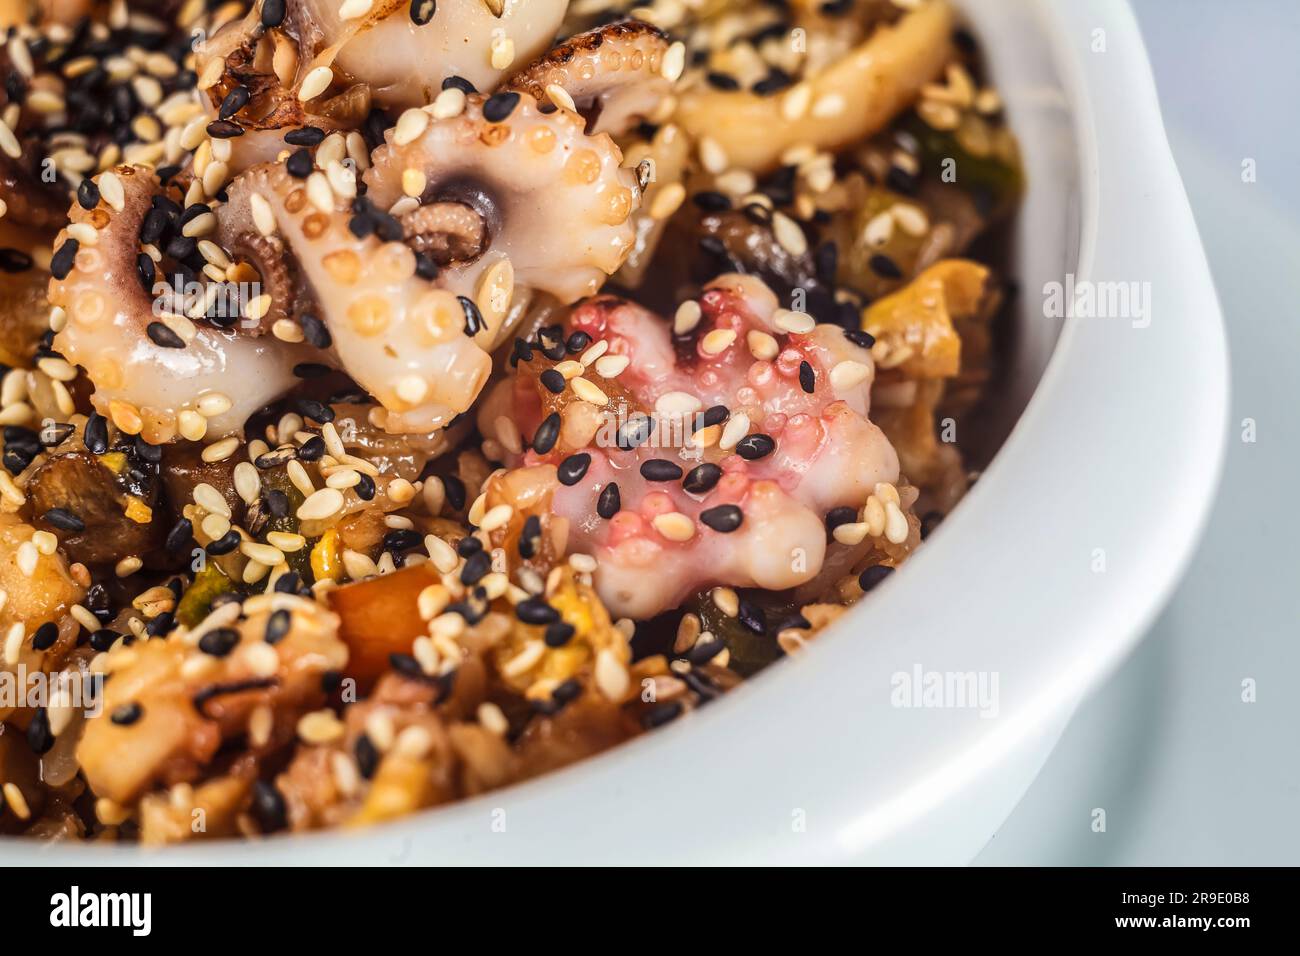 A nutritious breakfast bowl featuring octopus, rice, and a variety of seeds for the ultimate healthy eating meal. Stock Photo